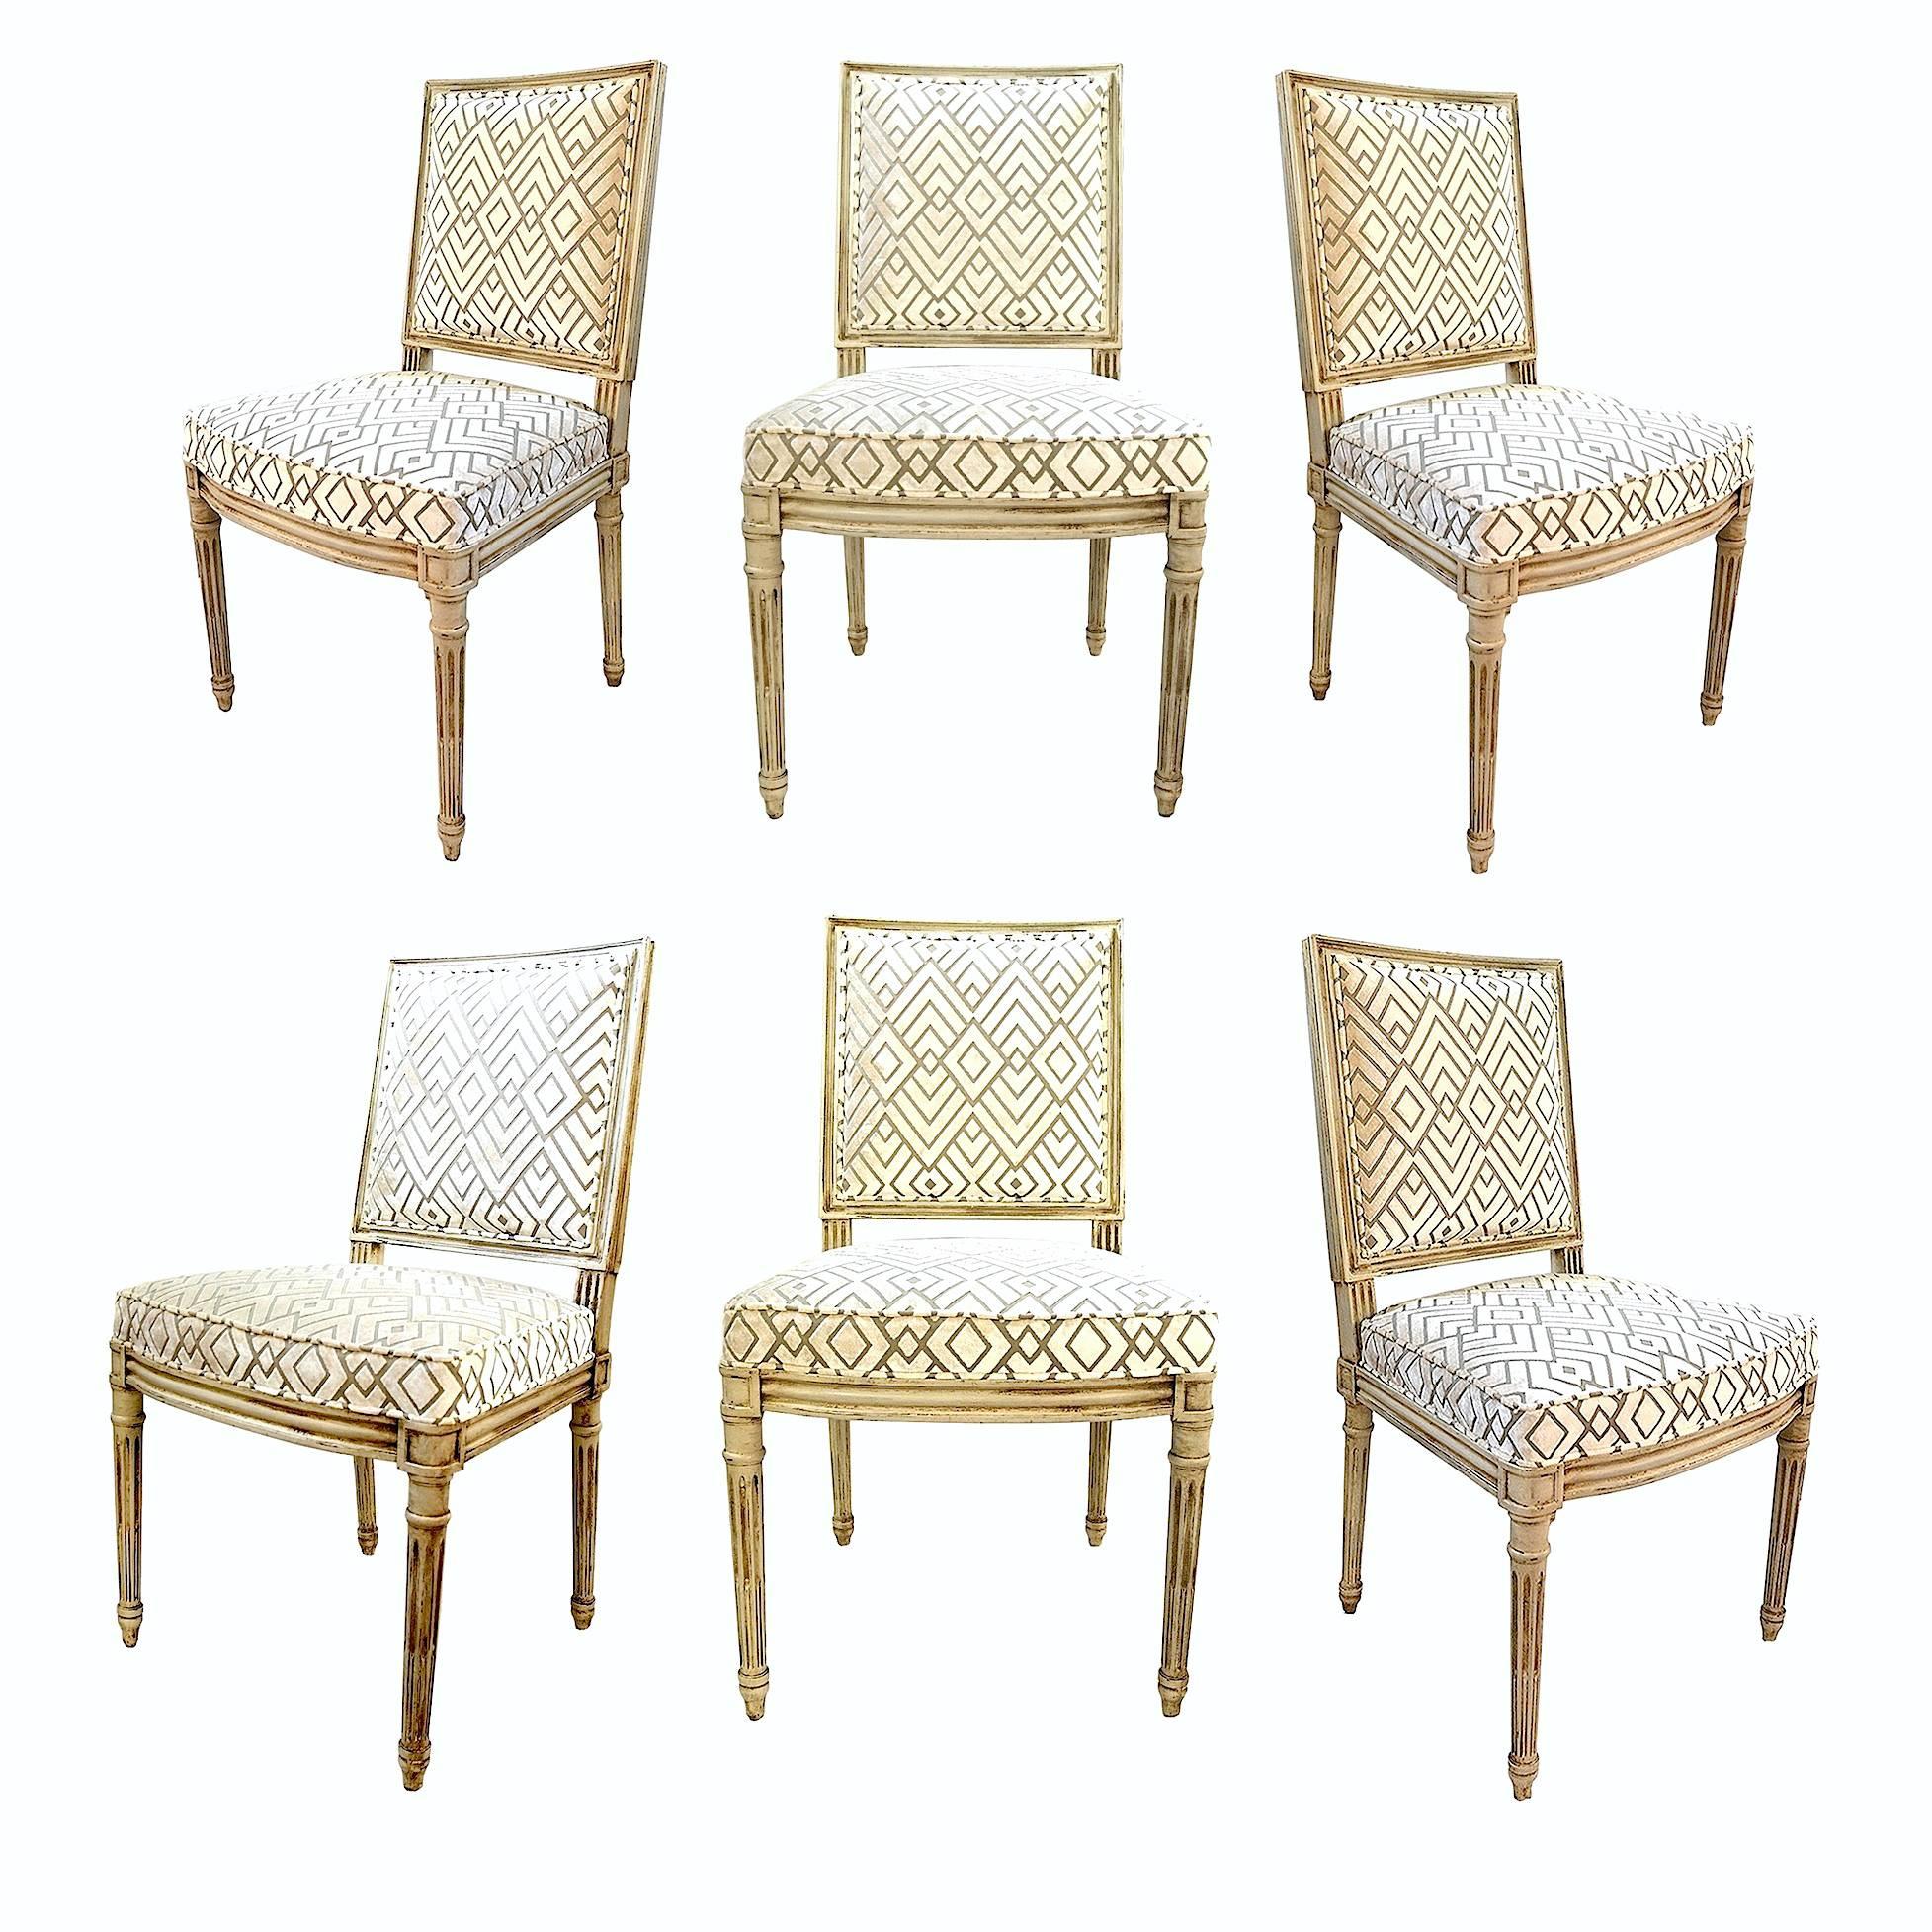 Set of six Louis XVI style dining chairs by Henredon that have been updated in a fantastic geometric cut-velvet. The look is luxe and clean. Classic French chair lines juxtaposed with a contemporary looking and feeling fabric choice. The set is